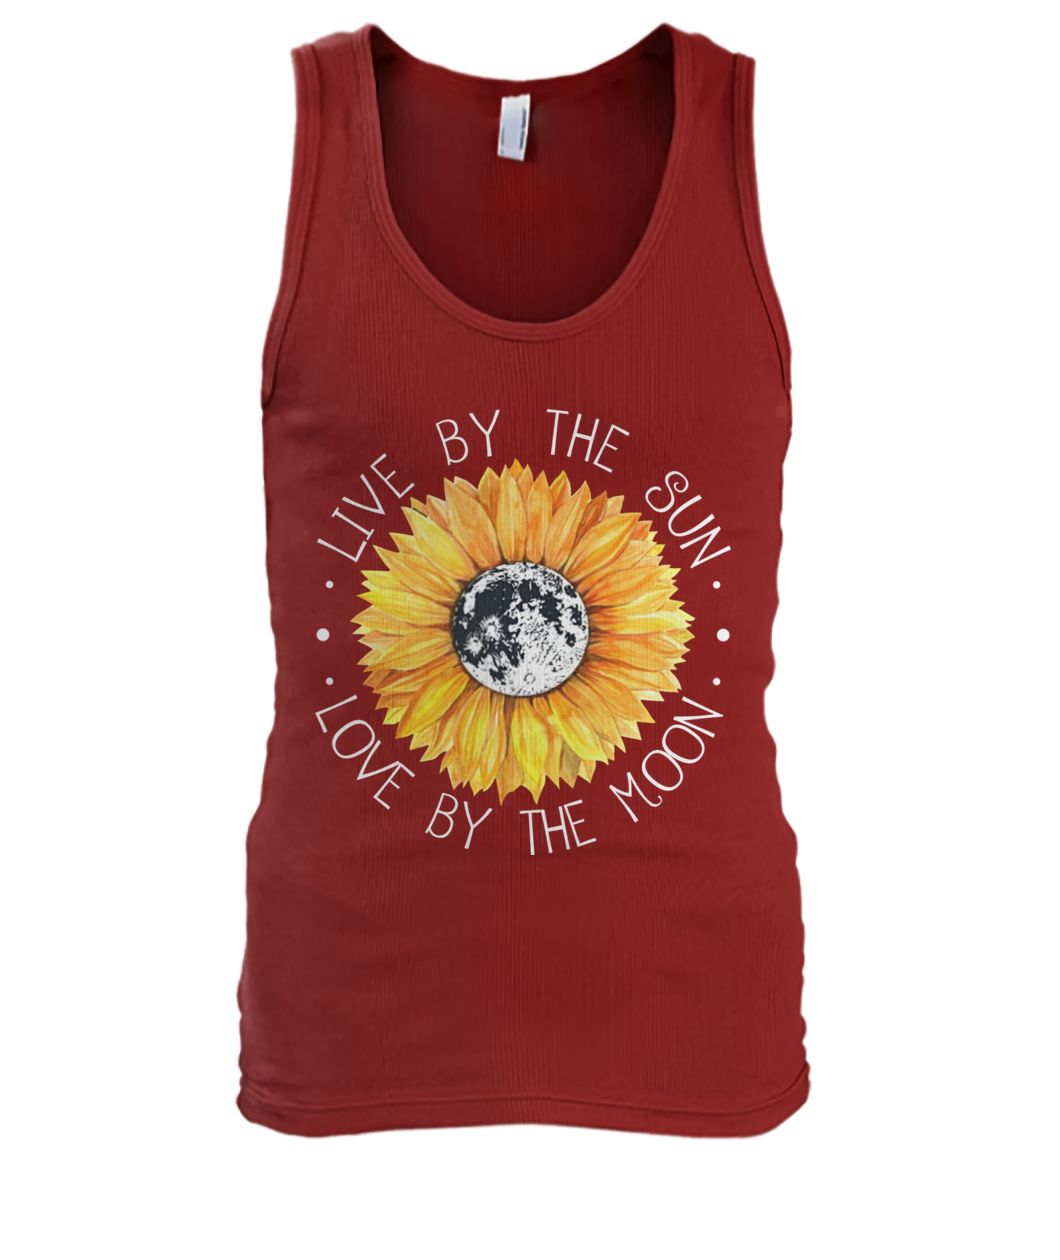 Hippie sunflower live by the sun love by the moon men's tank top